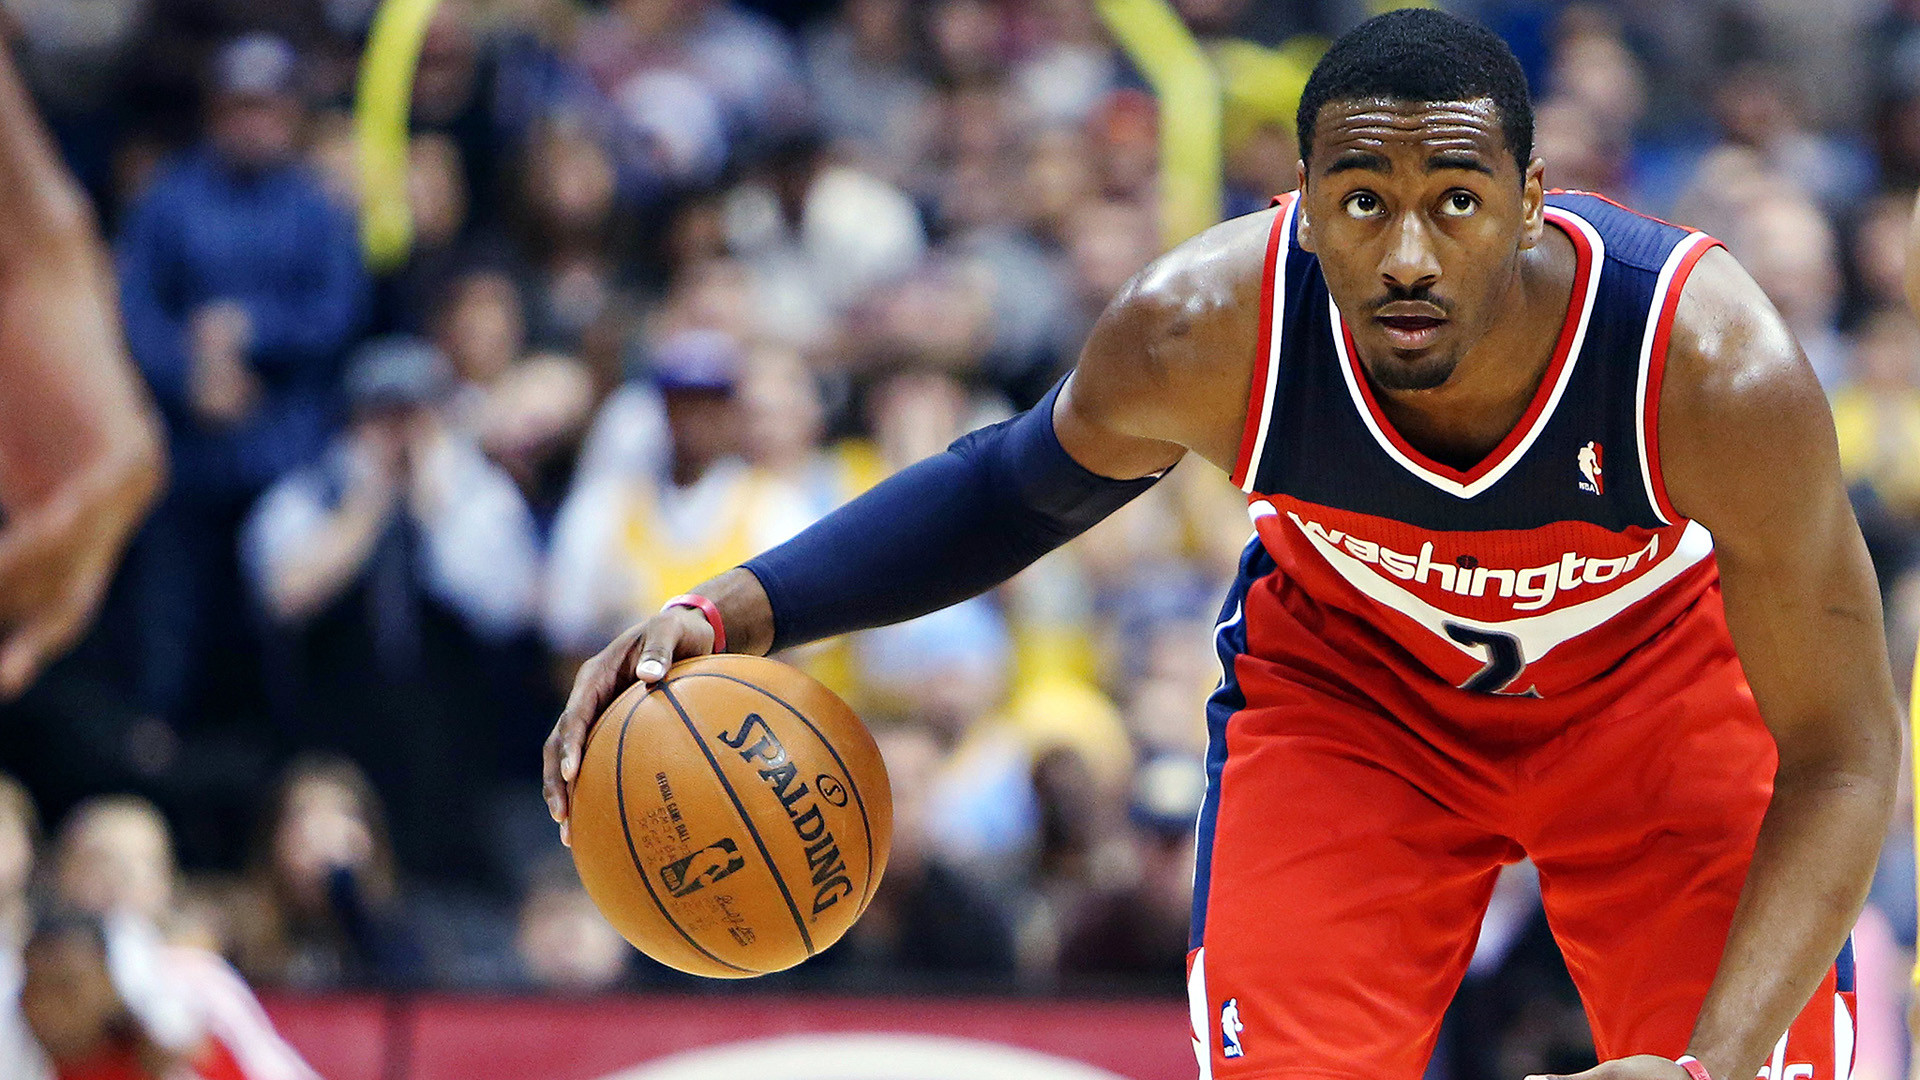 1920x1080 free john wall wallpaper full hd download high definiton wallpapers desktop  images 4k quality images computer wallpapers cool best 1920Ã1080 Wallpaper  HD